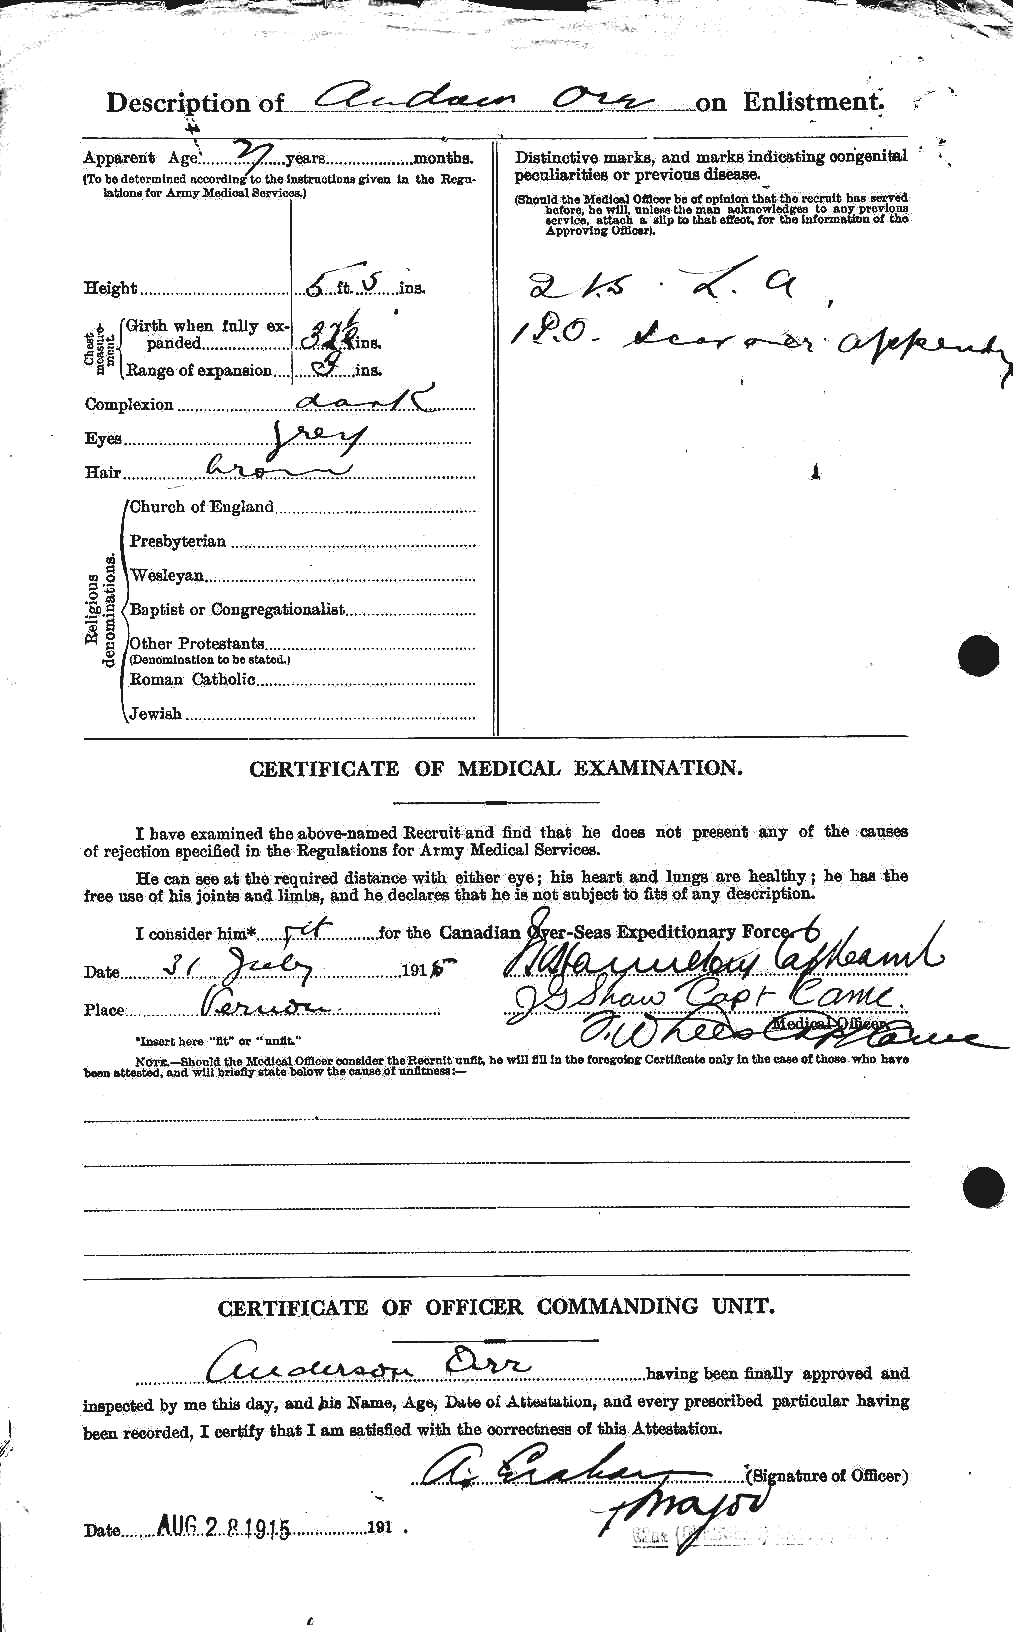 Personnel Records of the First World War - CEF 558700b